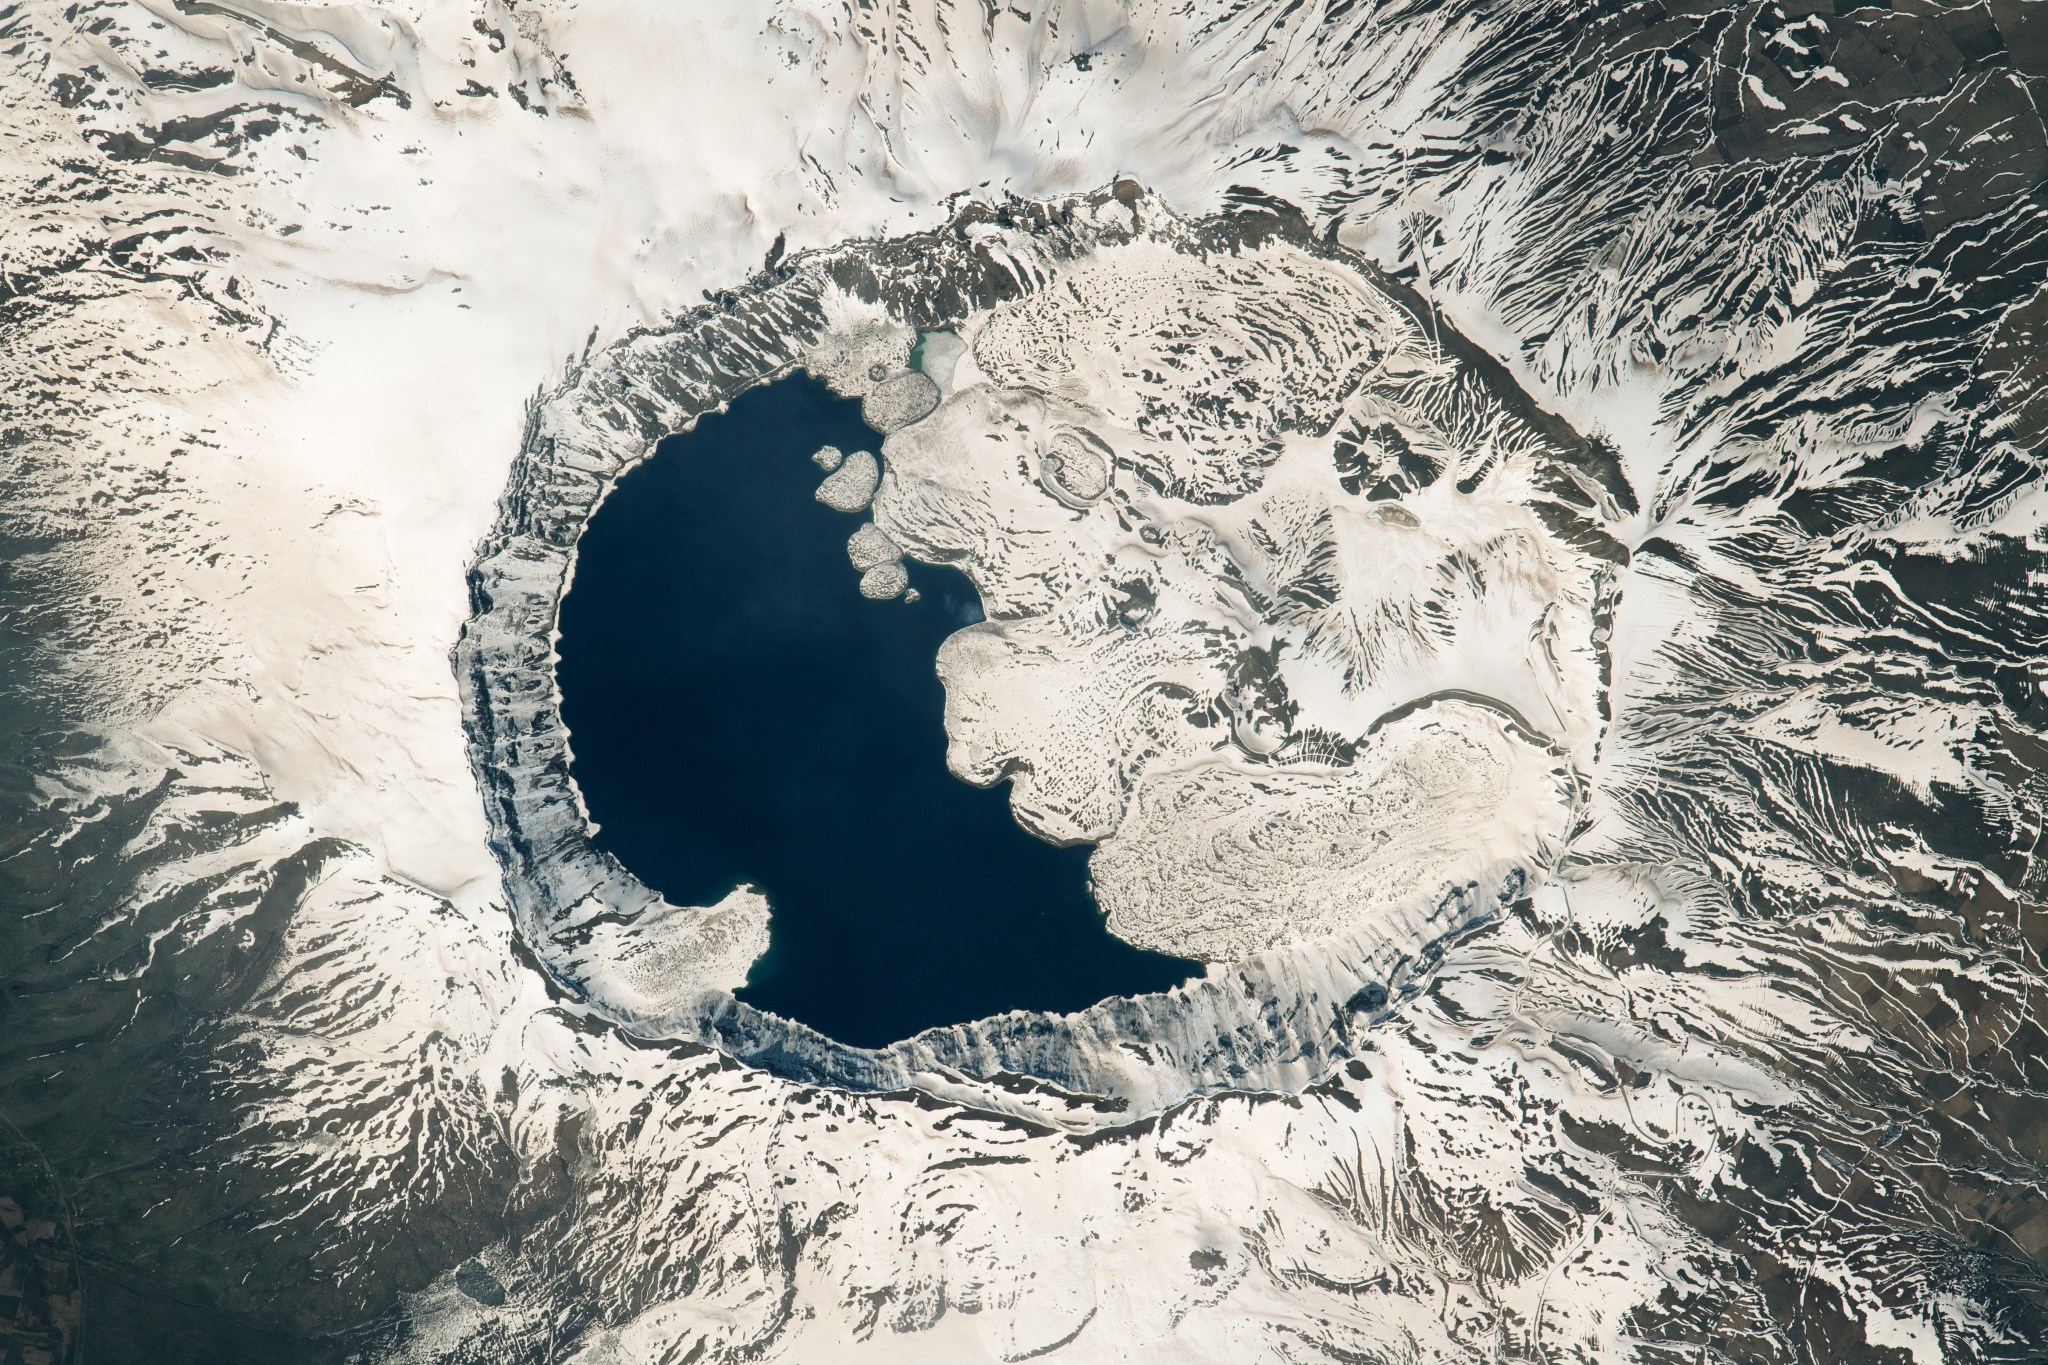 An astronaut aboard the International Space Station captured this photo of the snow-covered caldera of the Nemrut volcano in eastern Türkiye, along the western shore of Lake Van.